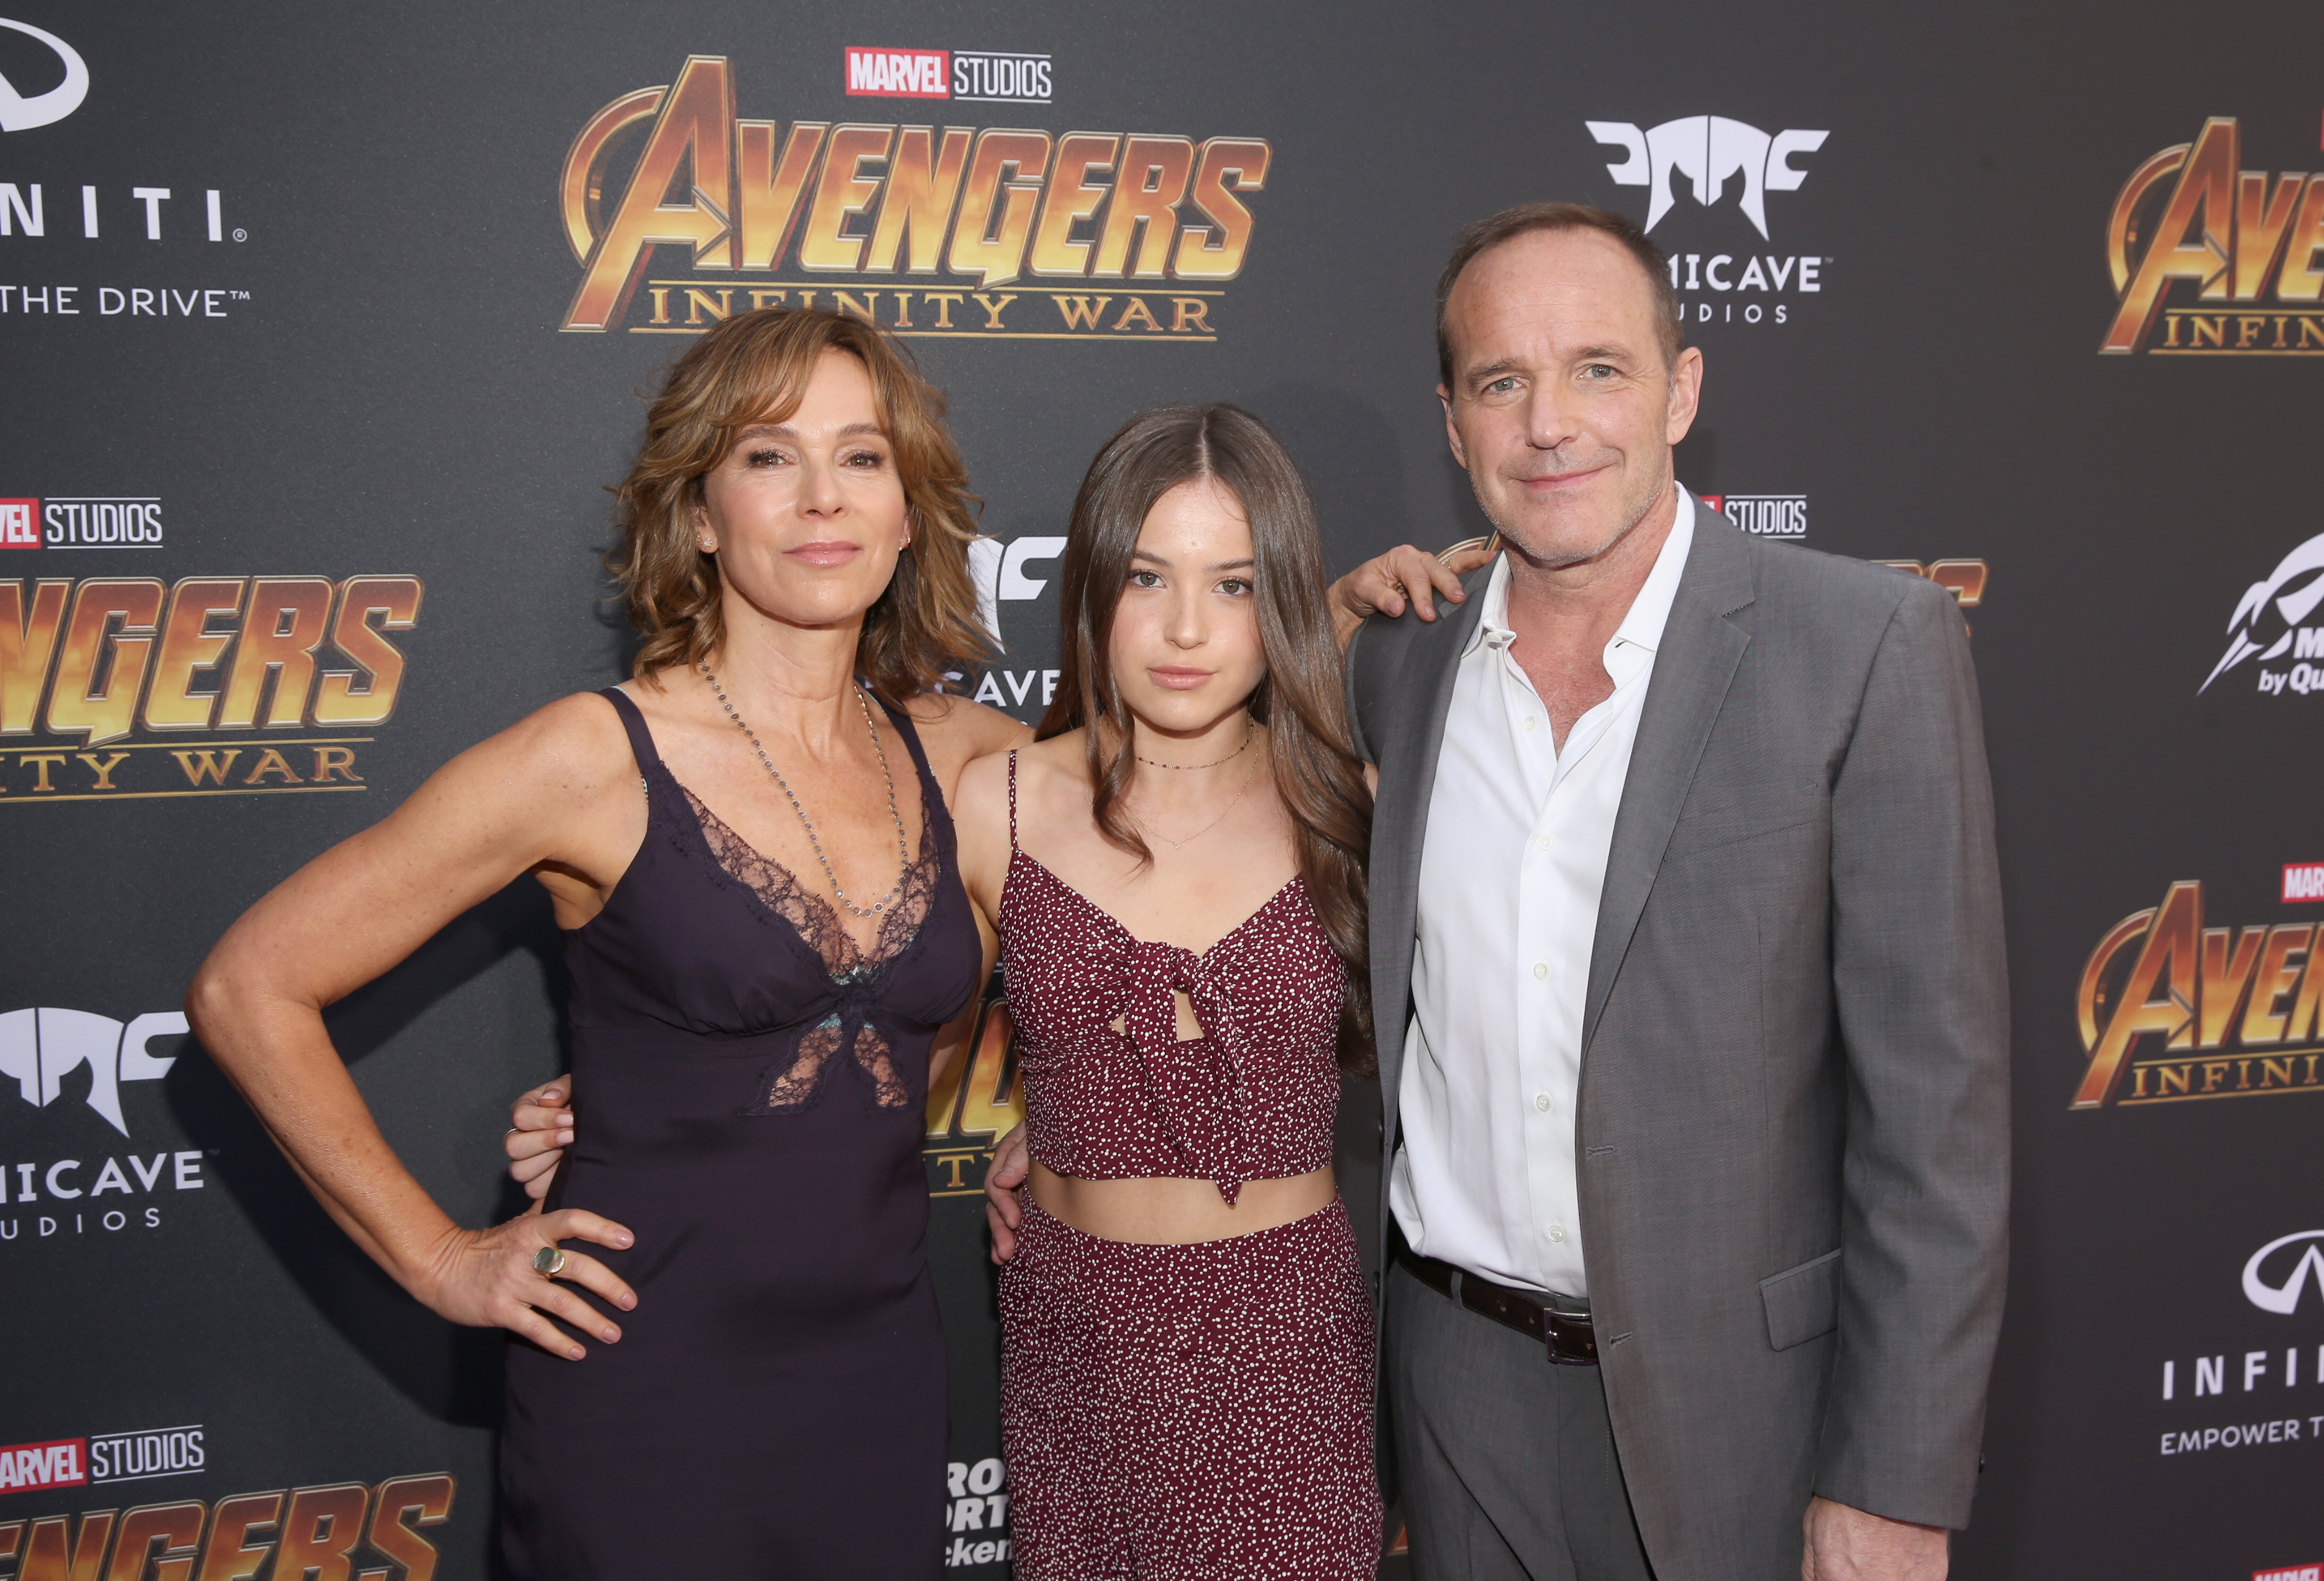 (L-R) Jennifer Grey, Stella Gregg, and Clark Gregg attend the premiere for "Avengers: Infinity War" on April 23, 2018, in Hollywood, California. | Source: Getty Images